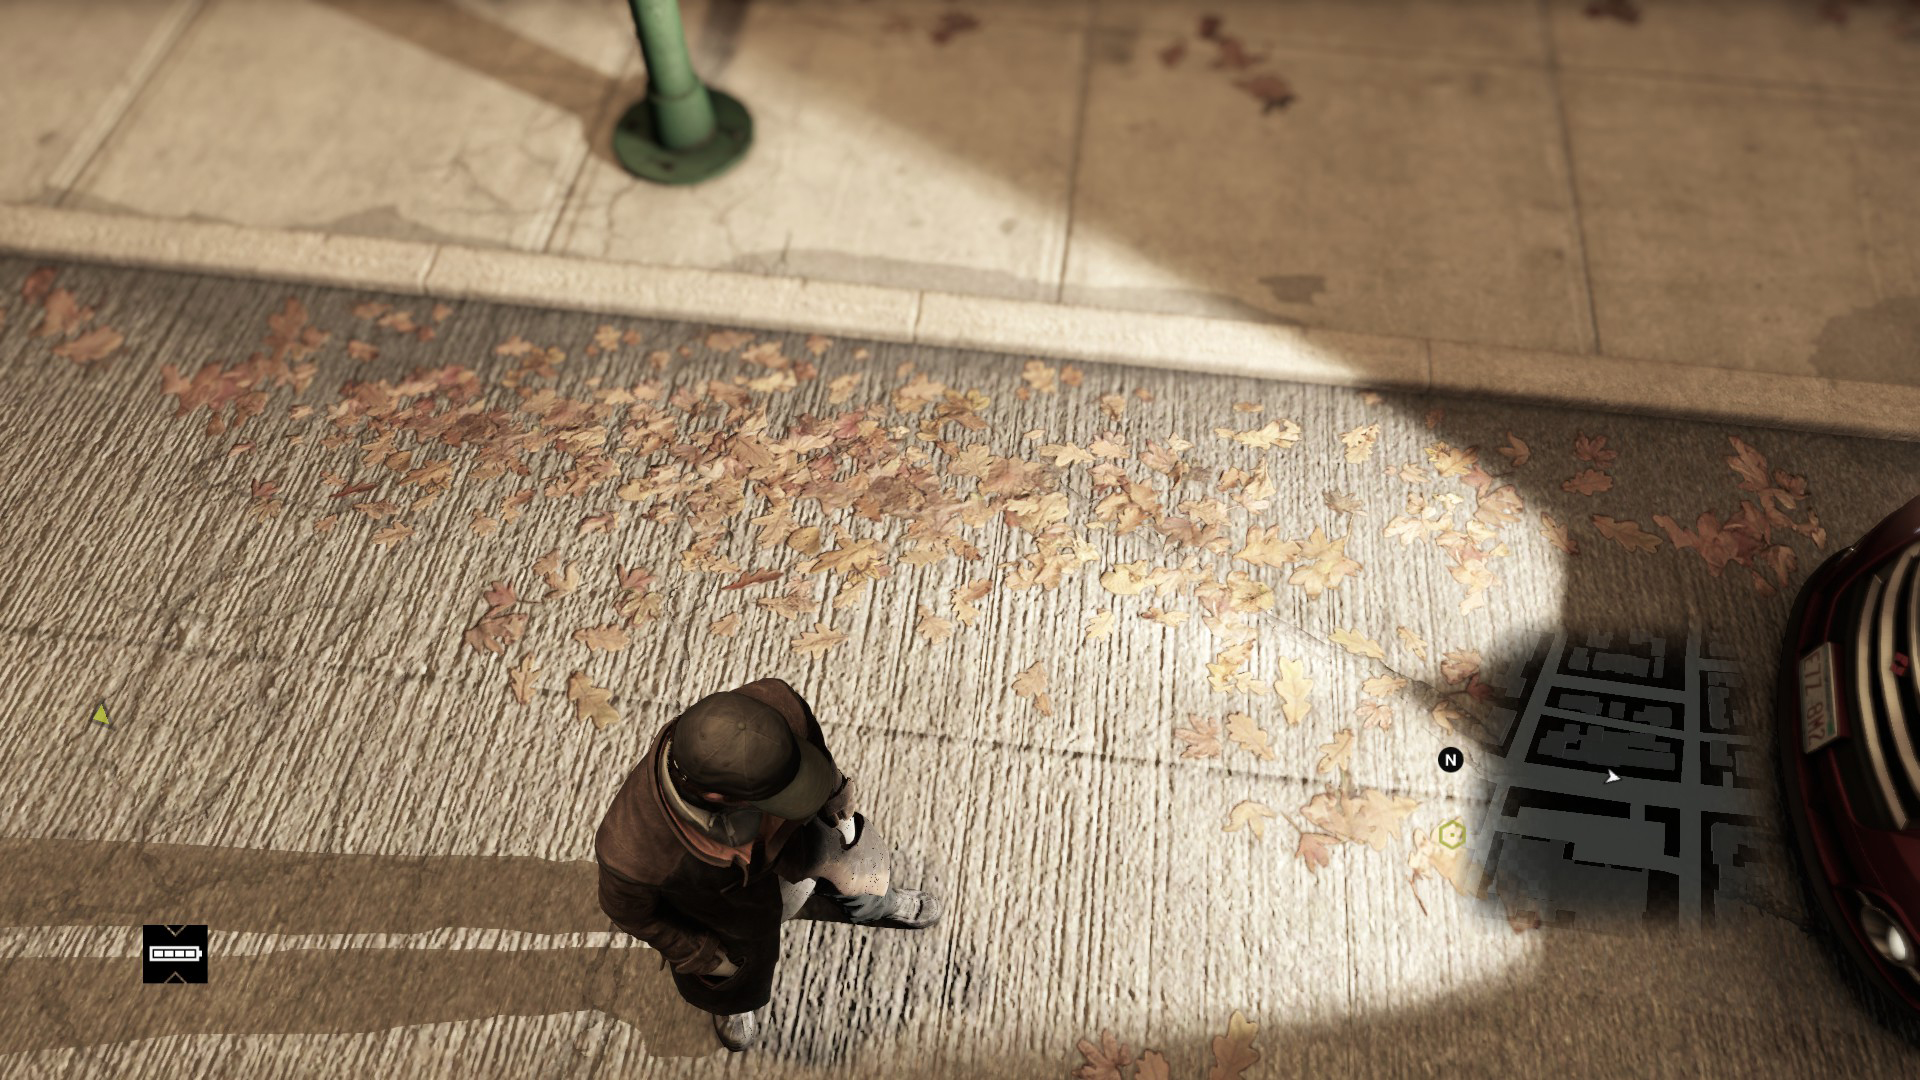 Modder Finds Files For Better Graphics In Watch Dogs’ PC Version